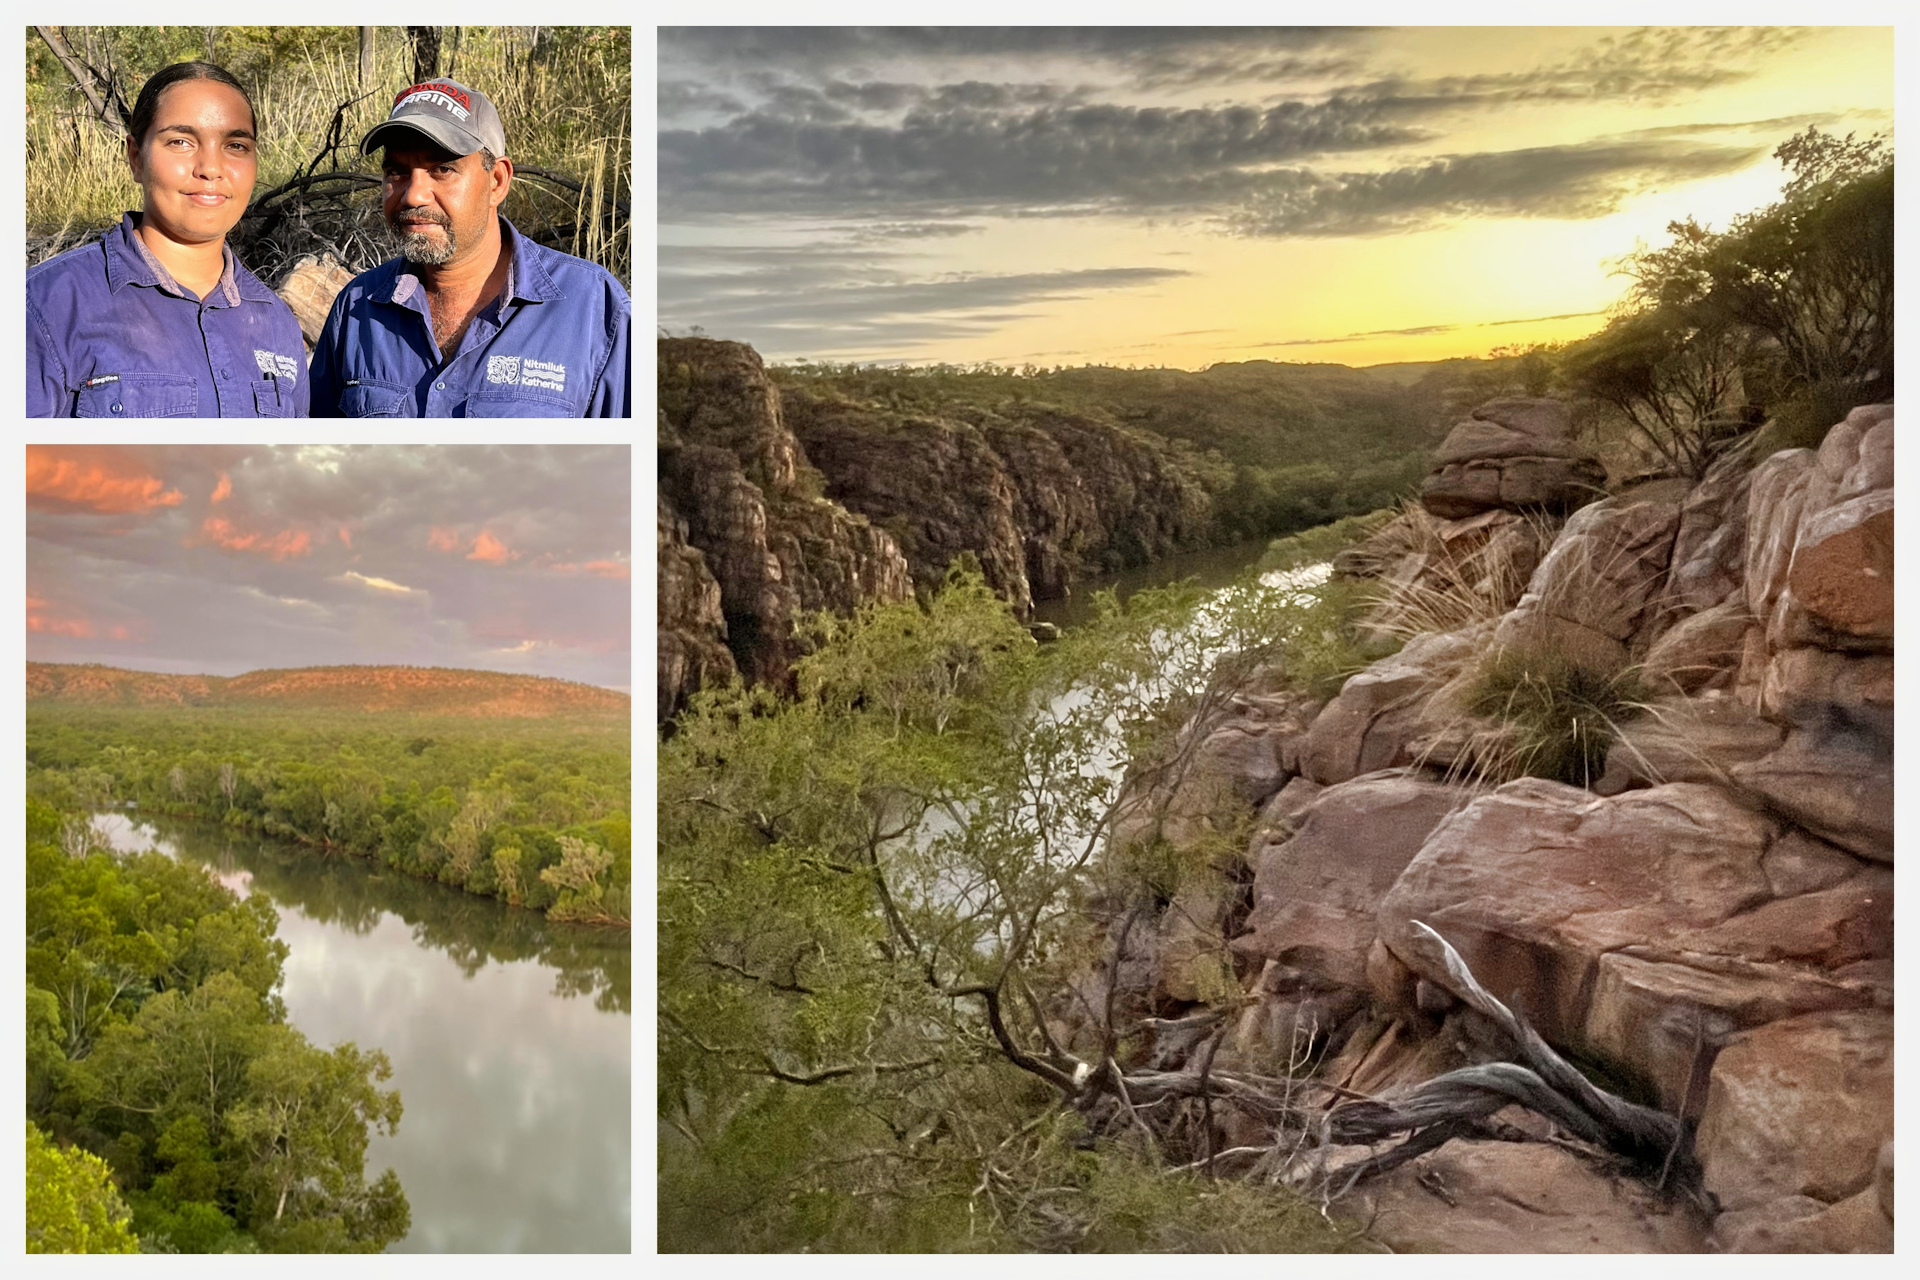 Scenes from Nimiluk Gorge in the Northern Territory